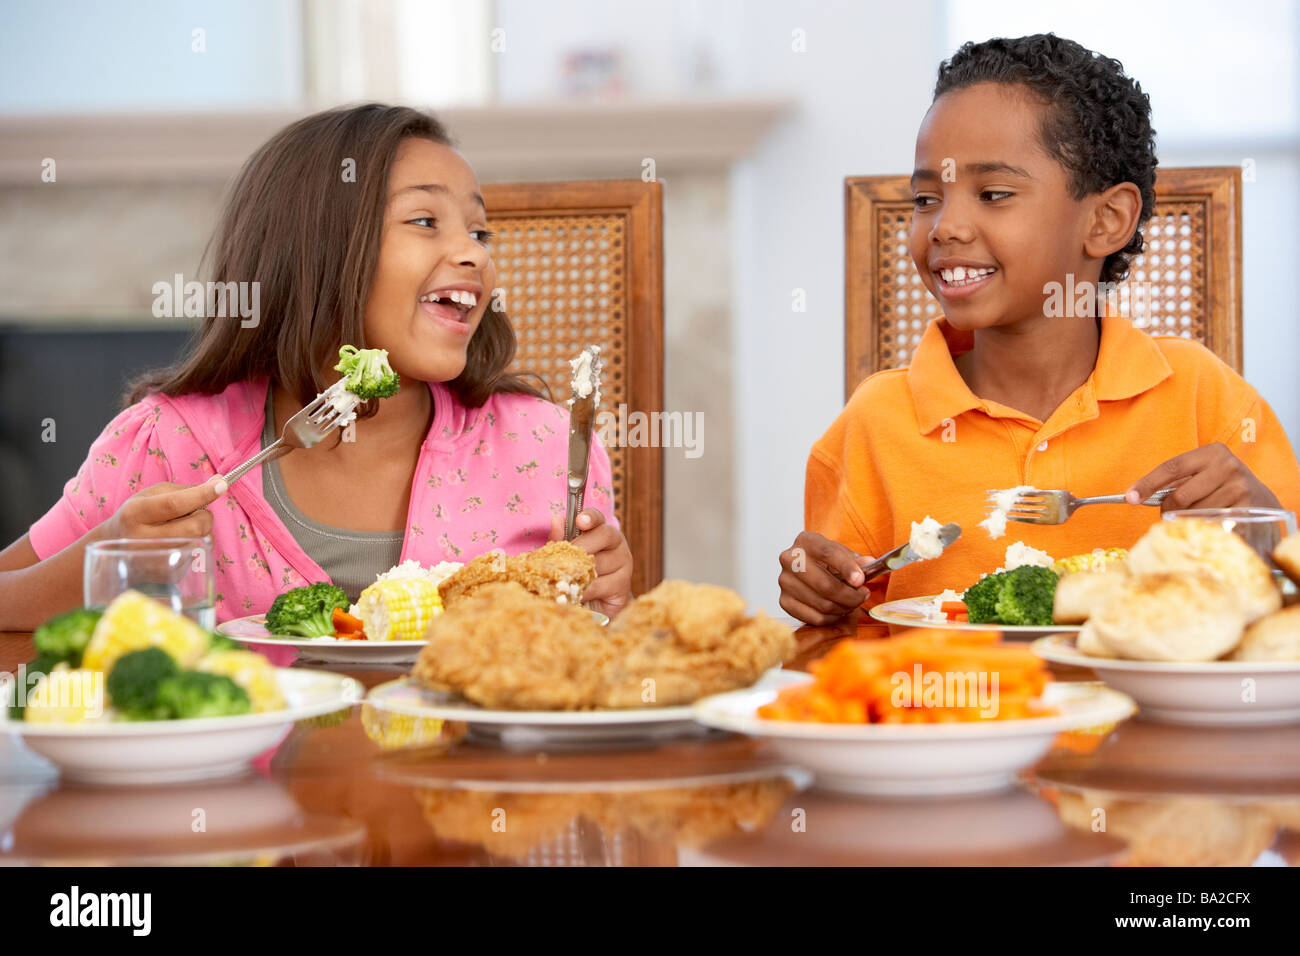 Brother And Sister Having Lunch Together At Home Stock Photo